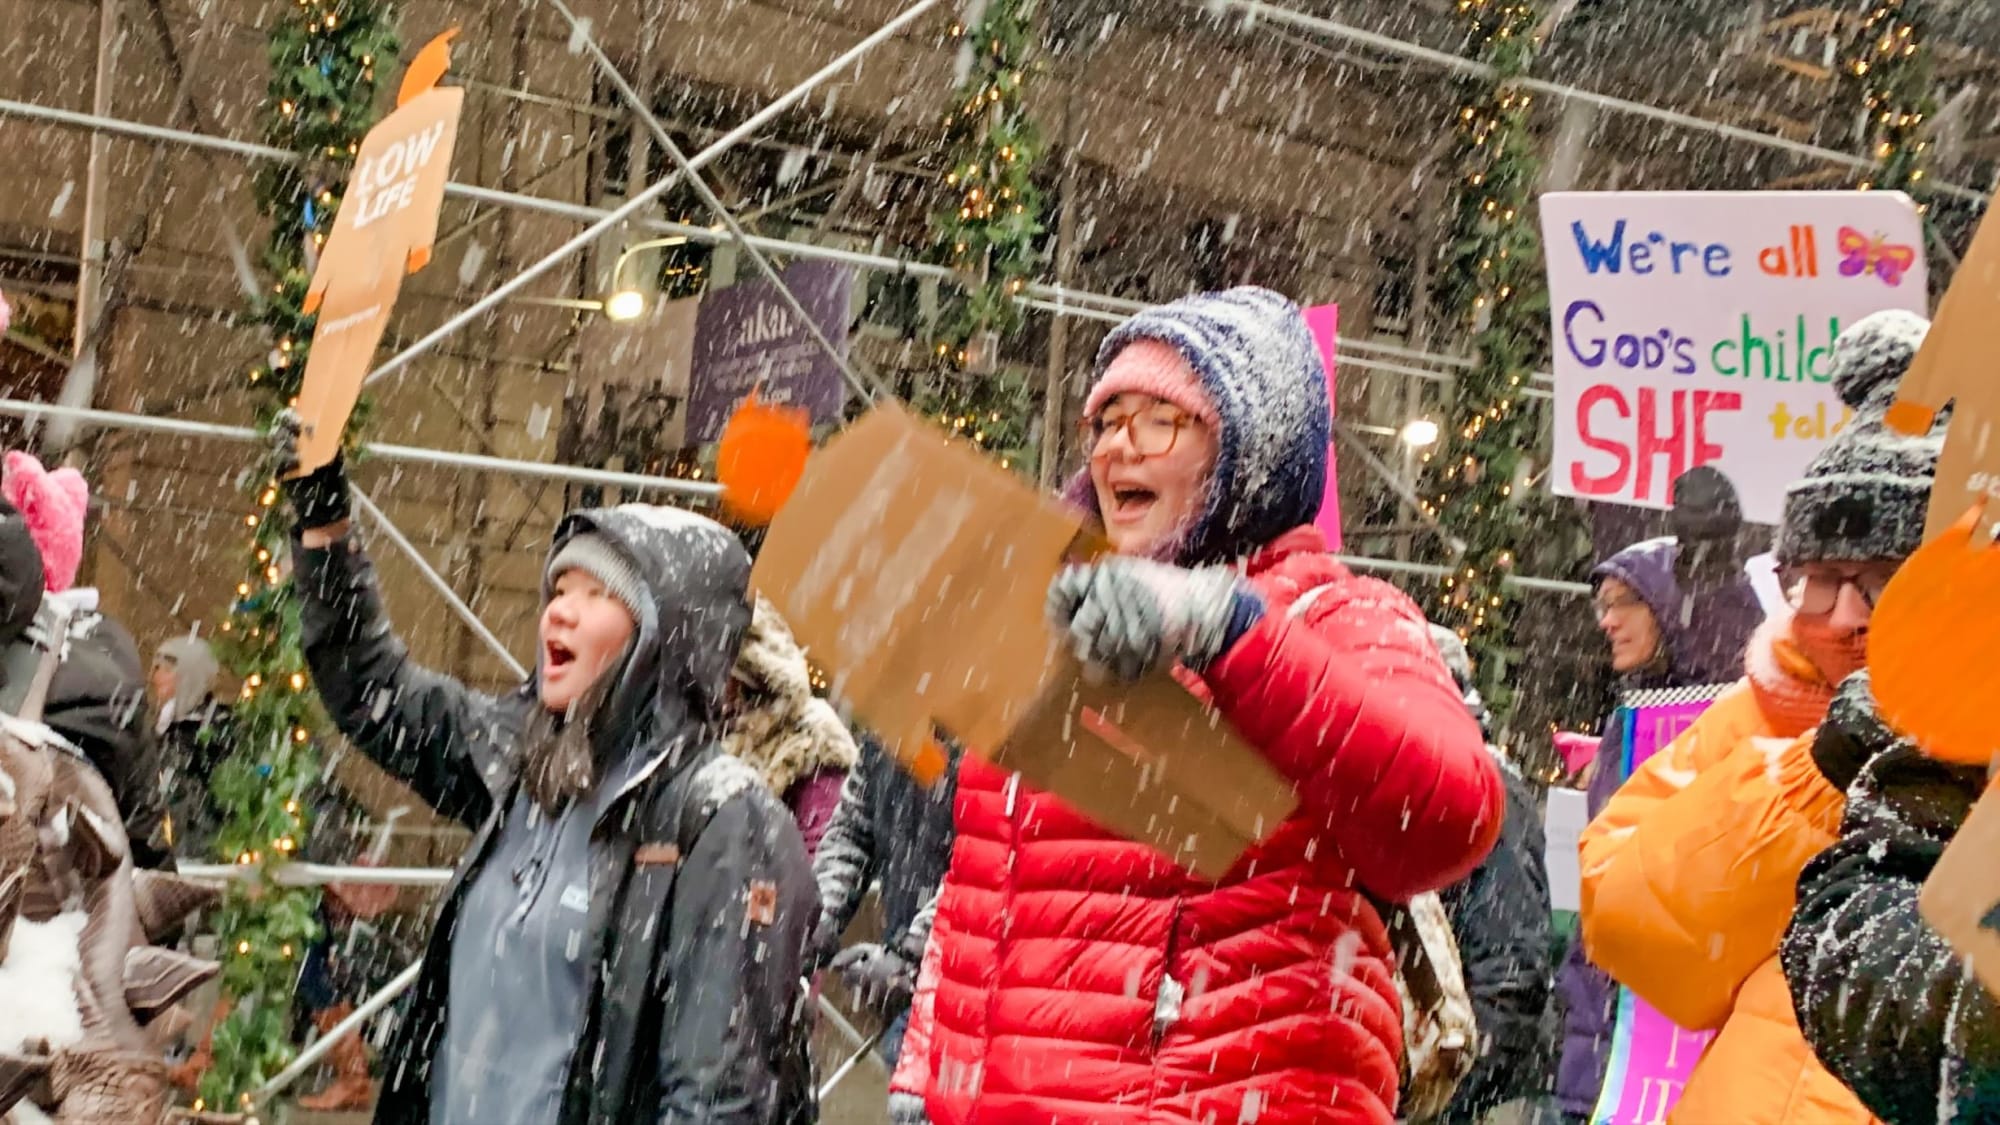 Photograph from the side of two students marching through a very windy and snowy New York City street, each holding a tiny trump